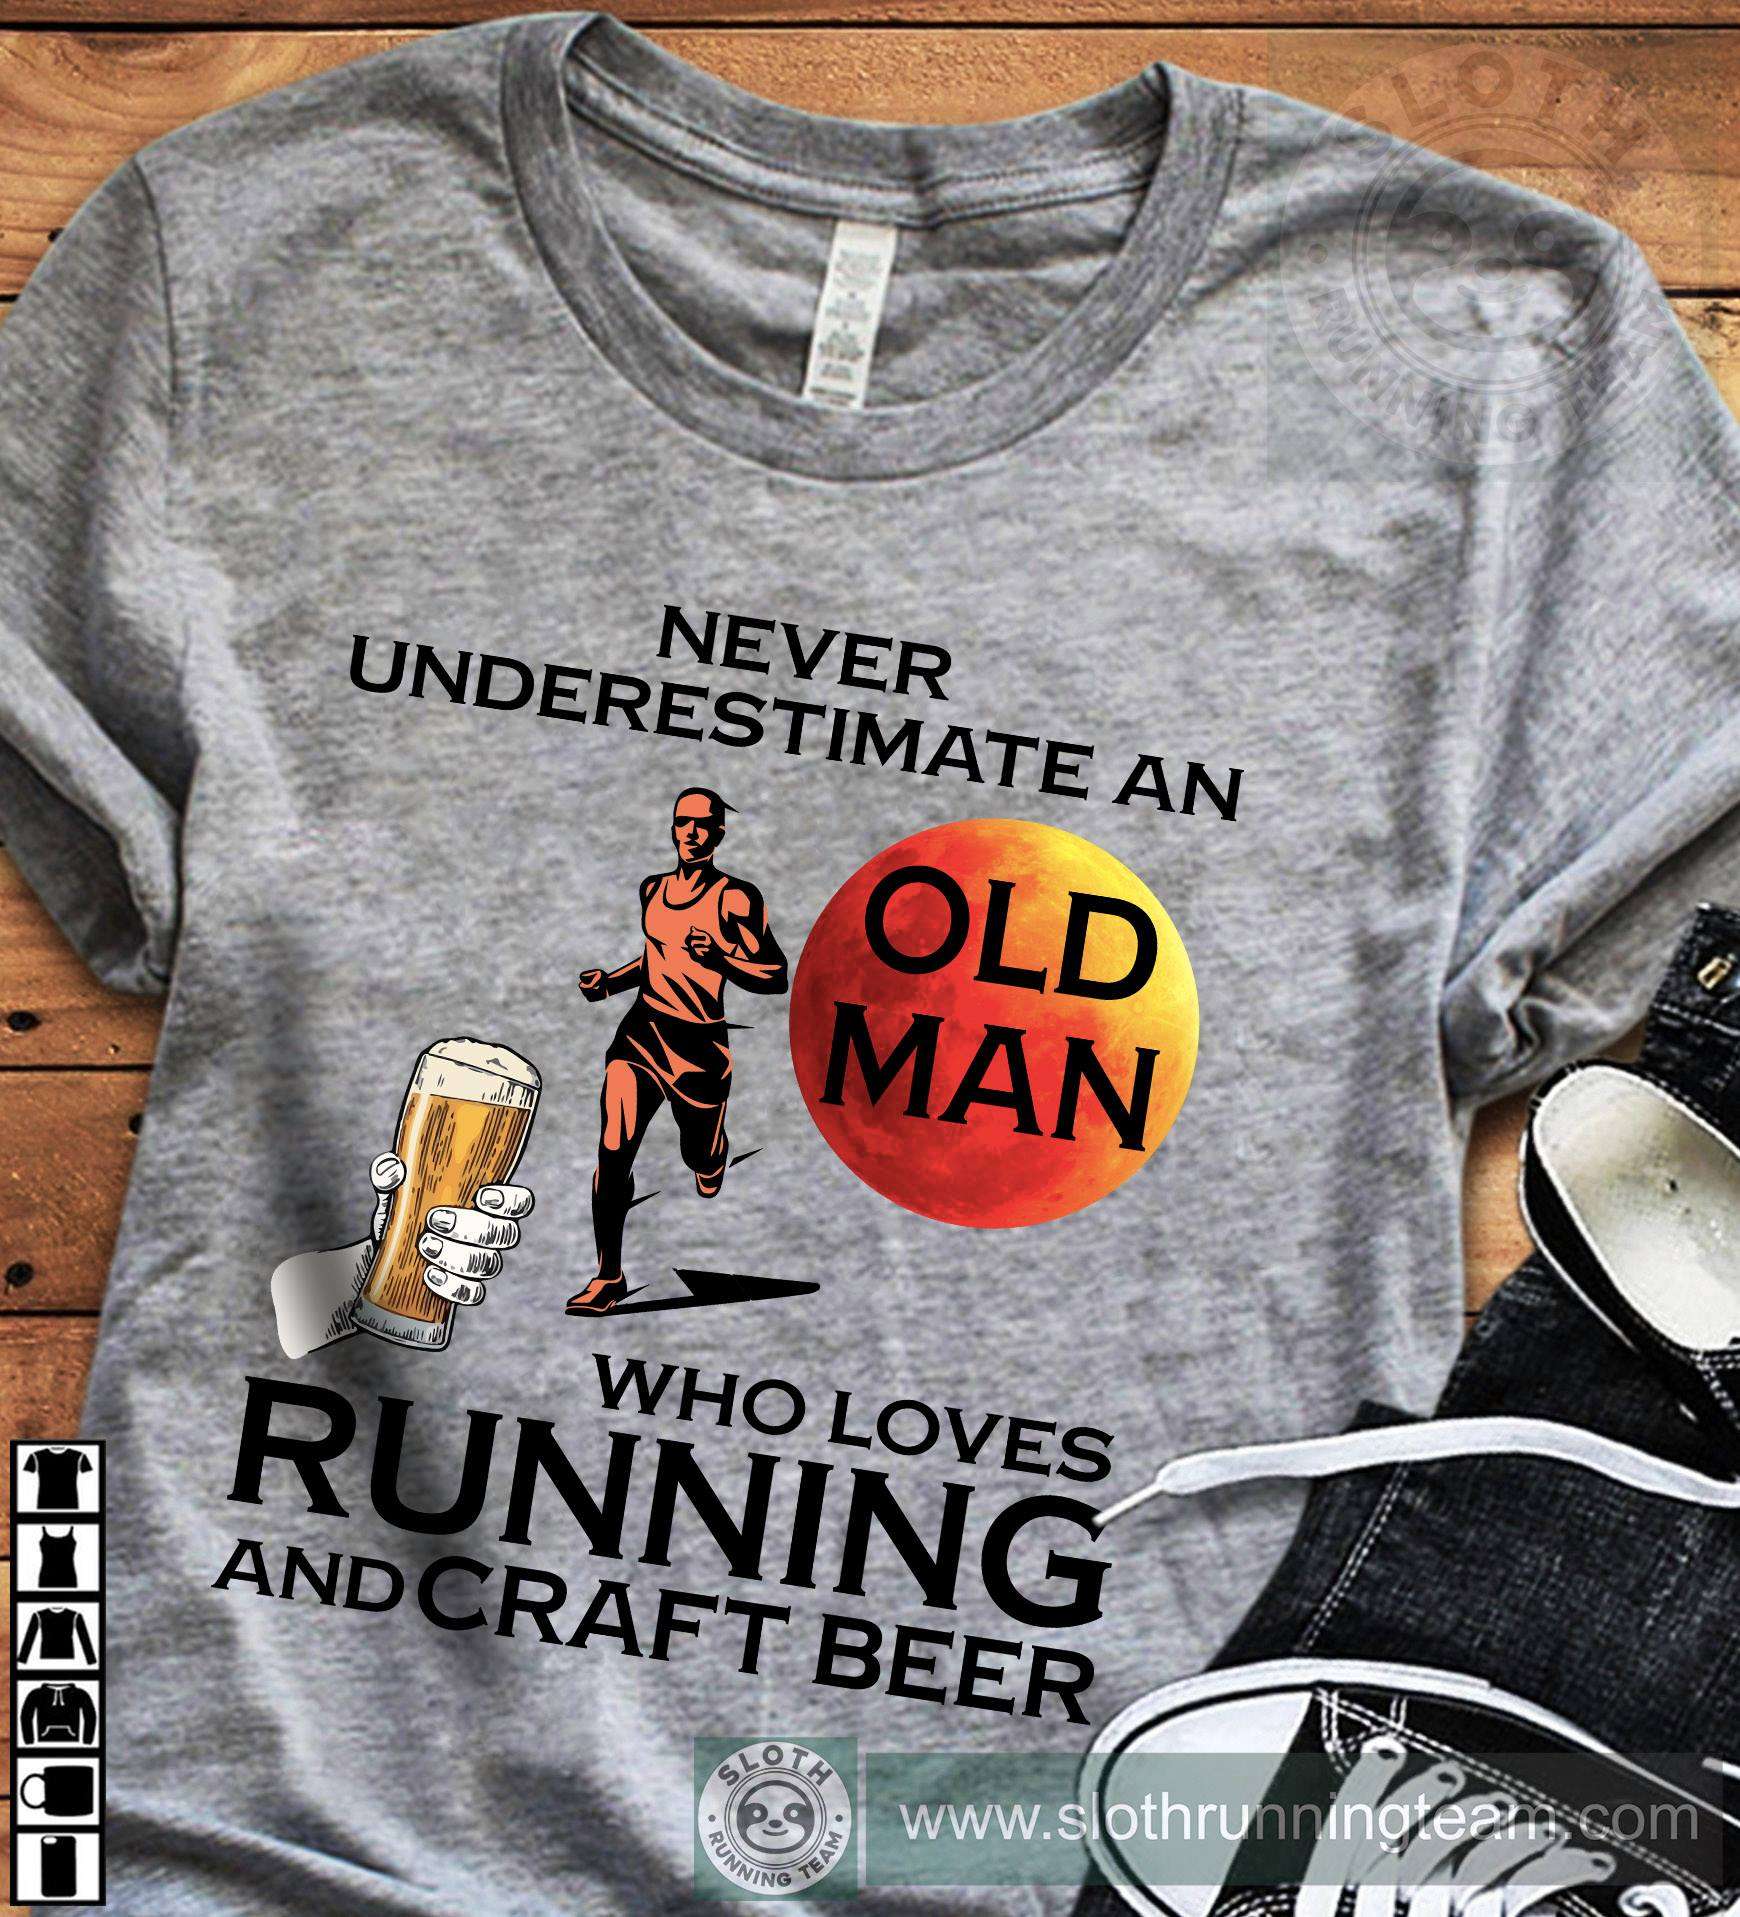 Running Man Beer - Never underestimate an old man who loves running and craft beer